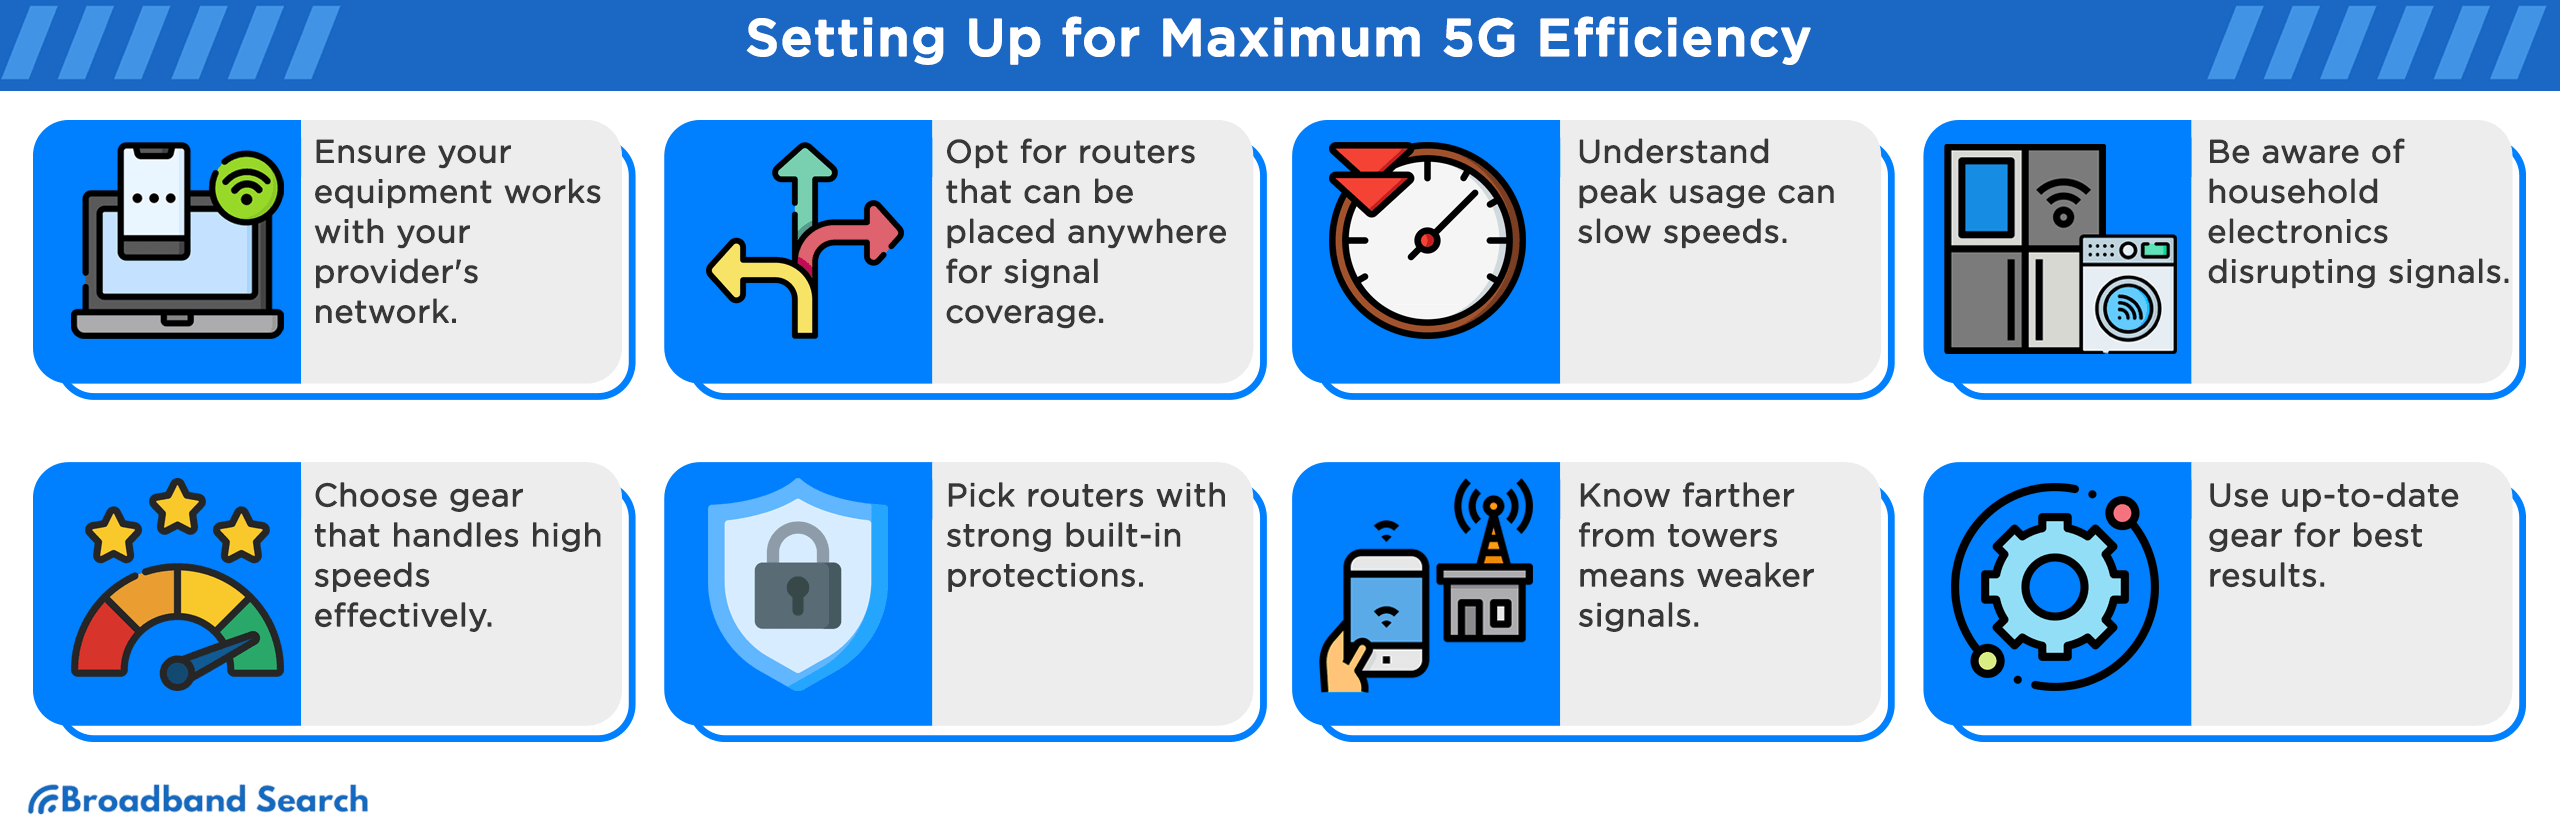 Setting up for maximum 5g efficiency